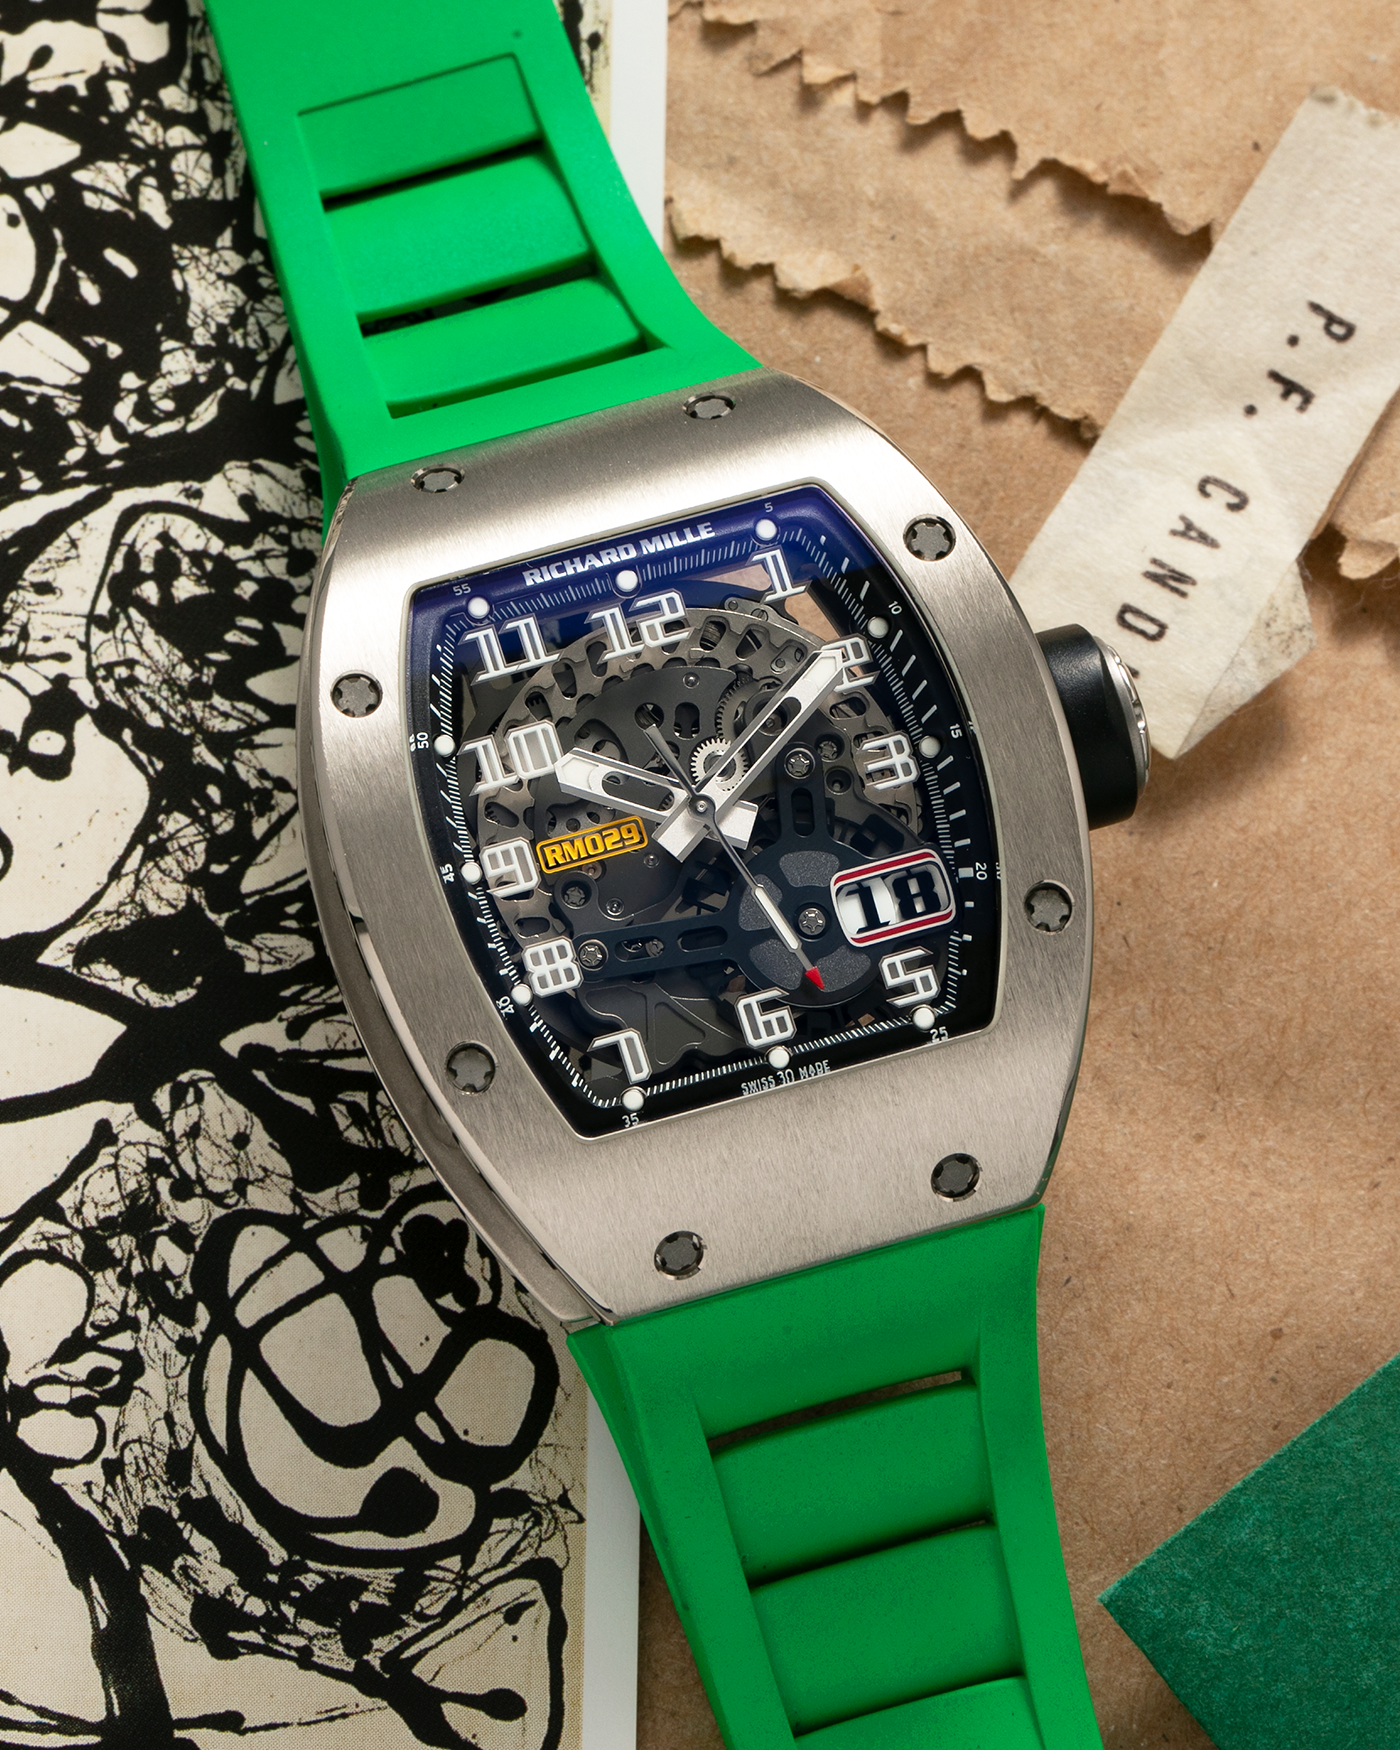 Brand: Richard Mille Year: 2014 Model: RM029 Case Material: 18-carat White Gold Movement: Richard Mille Cal. RMAS7, Self-Winding Case Dimensions: 39.7mm x 48mm  Strap: Richard Mille Green Rubber Strap with Signed Titanium Deployant Clasp, with two additional White and Black Richard Mille Rubber Straps